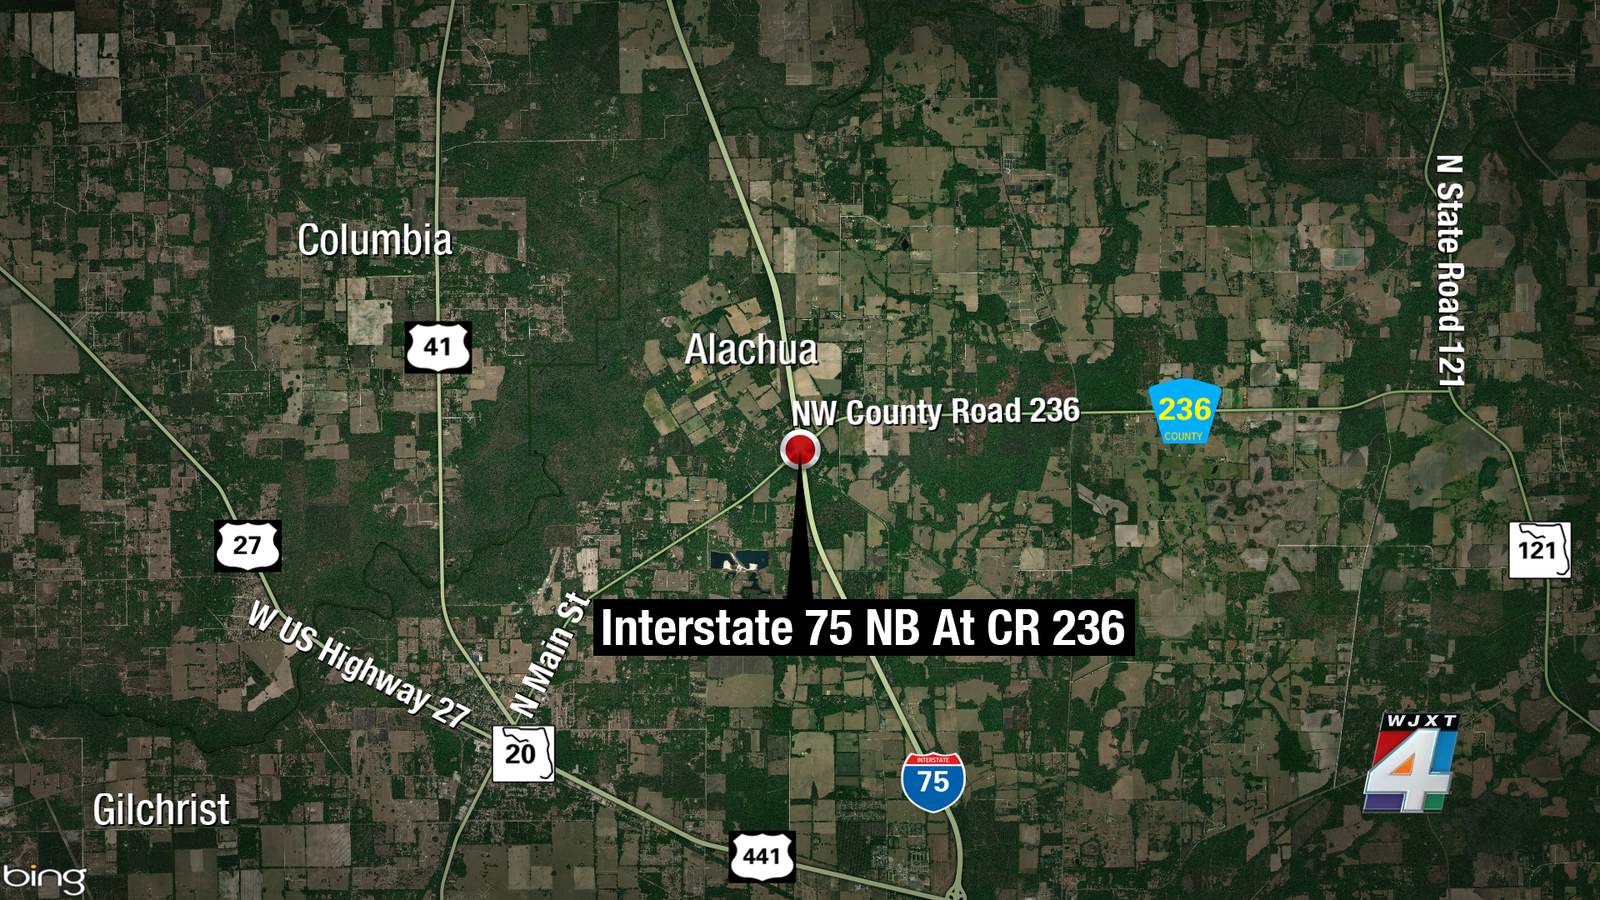 Man dies after crashing into trees off I-75